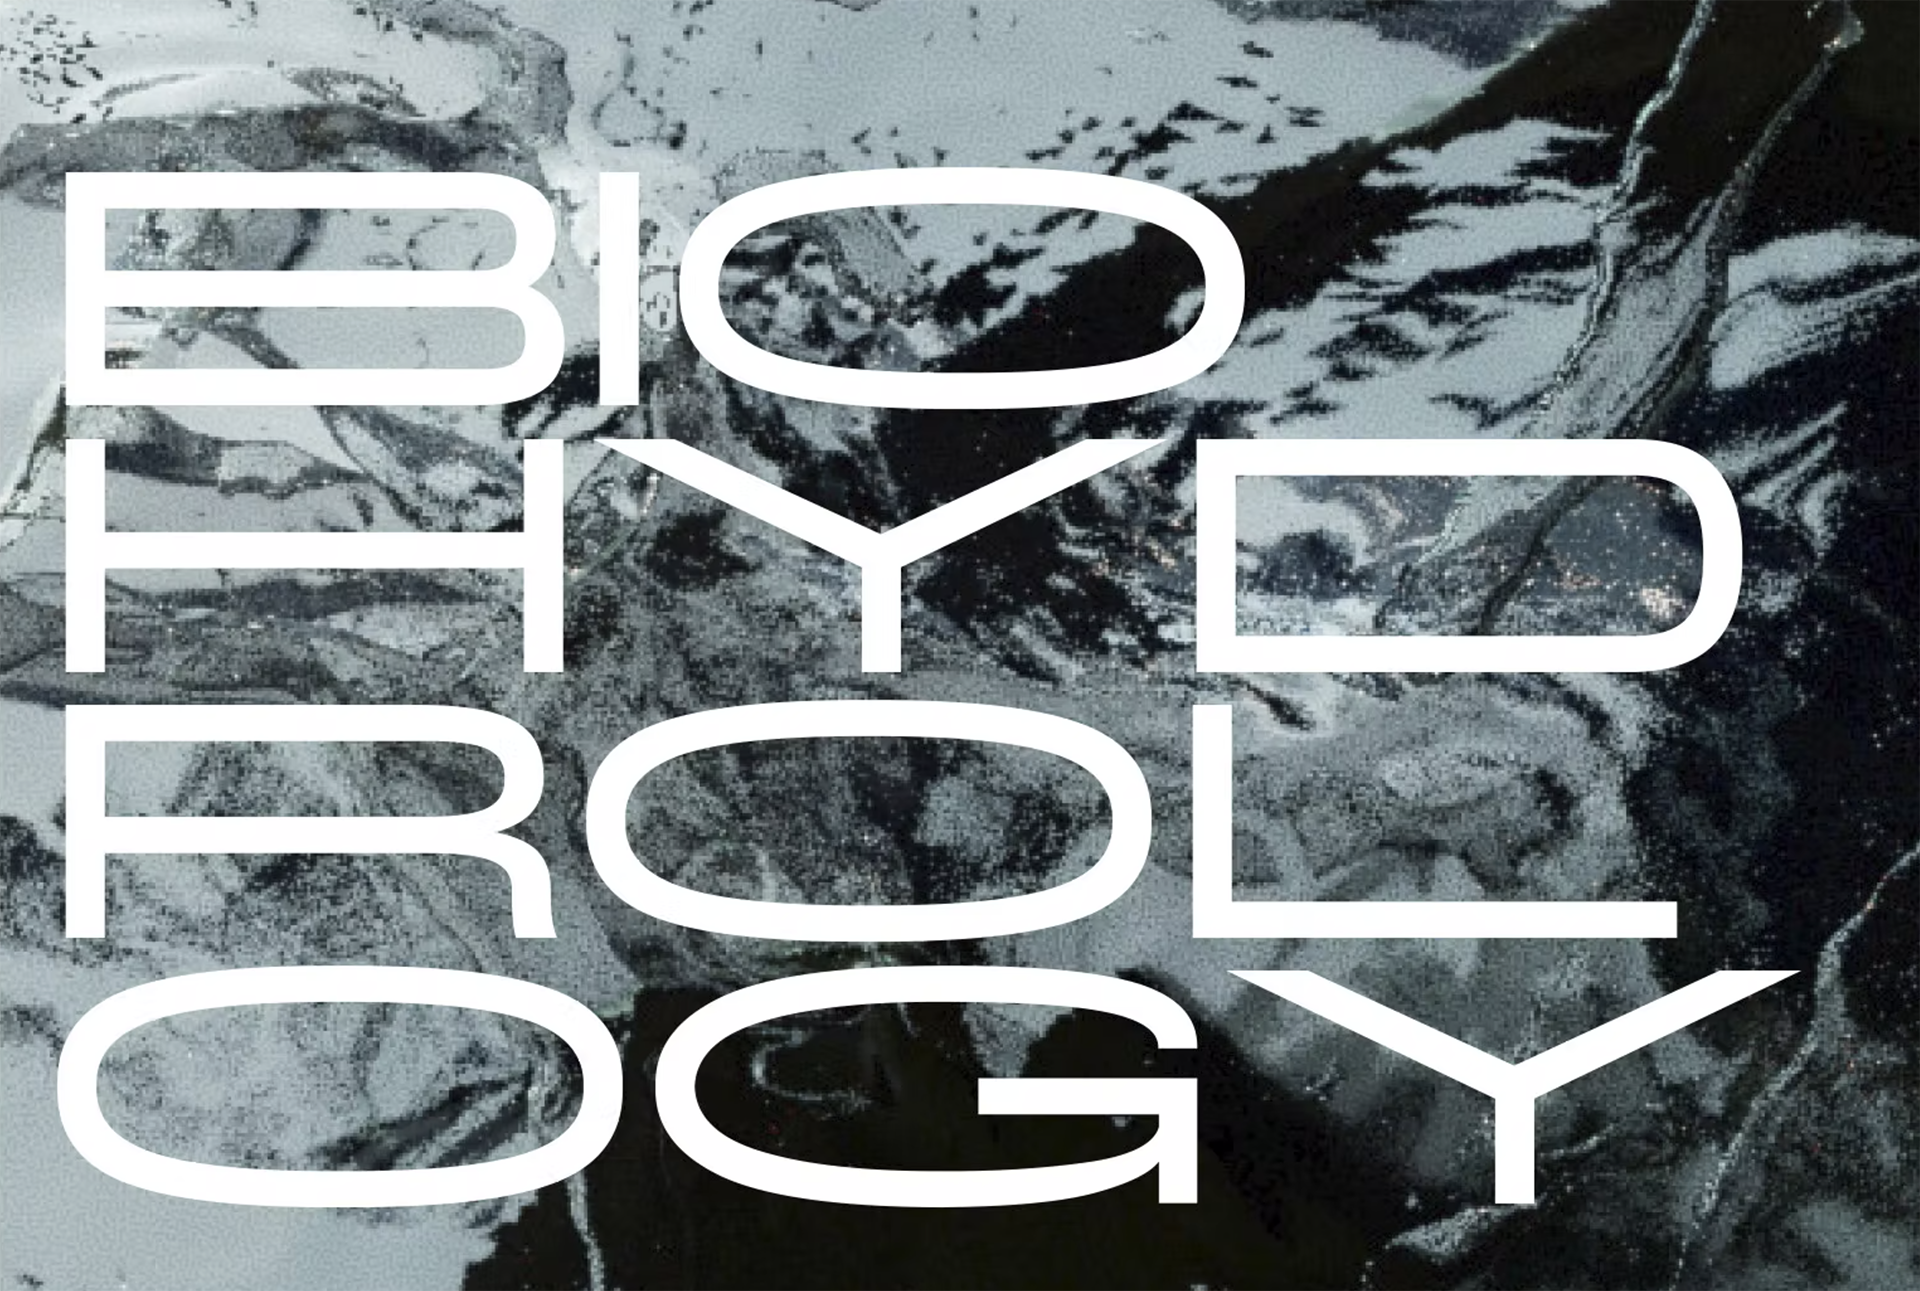 abstract grey scene with text "biohydrology" stylized 